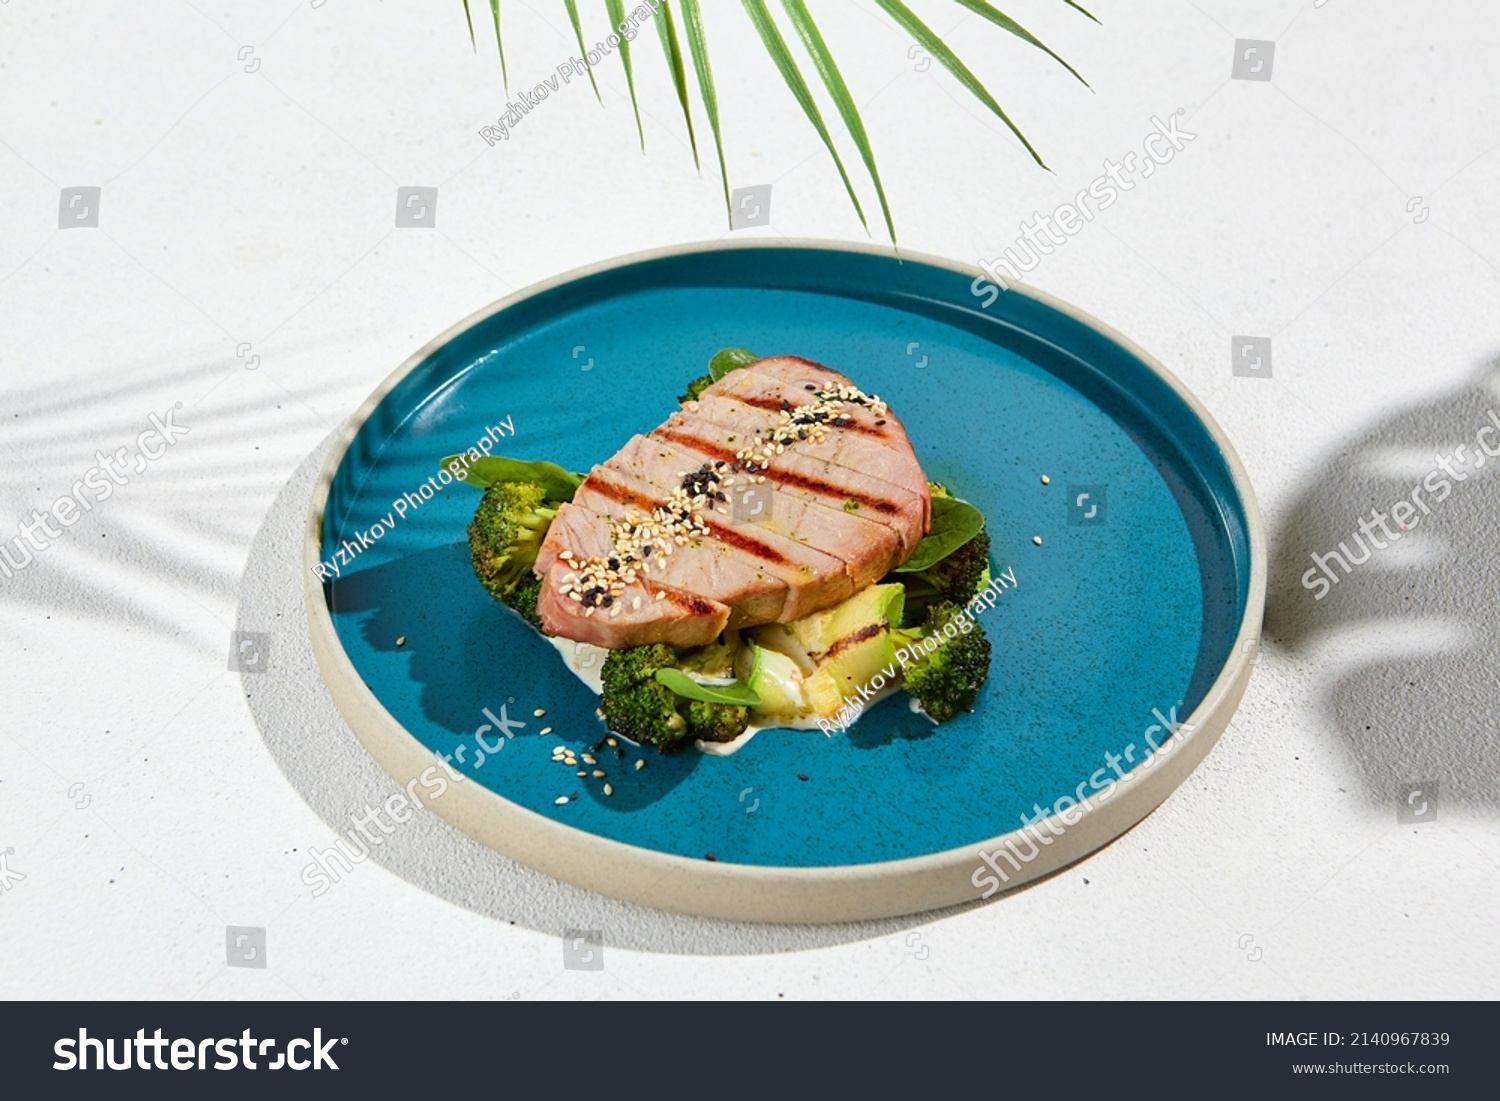 Grilled tuna steak with broccoli and zucchini in modern ceramic plate. Healthy food - roasted tuna with green vegetables. Fish dish in minimal style. Tuna fillet in blue plate with hard shadow #2140967839